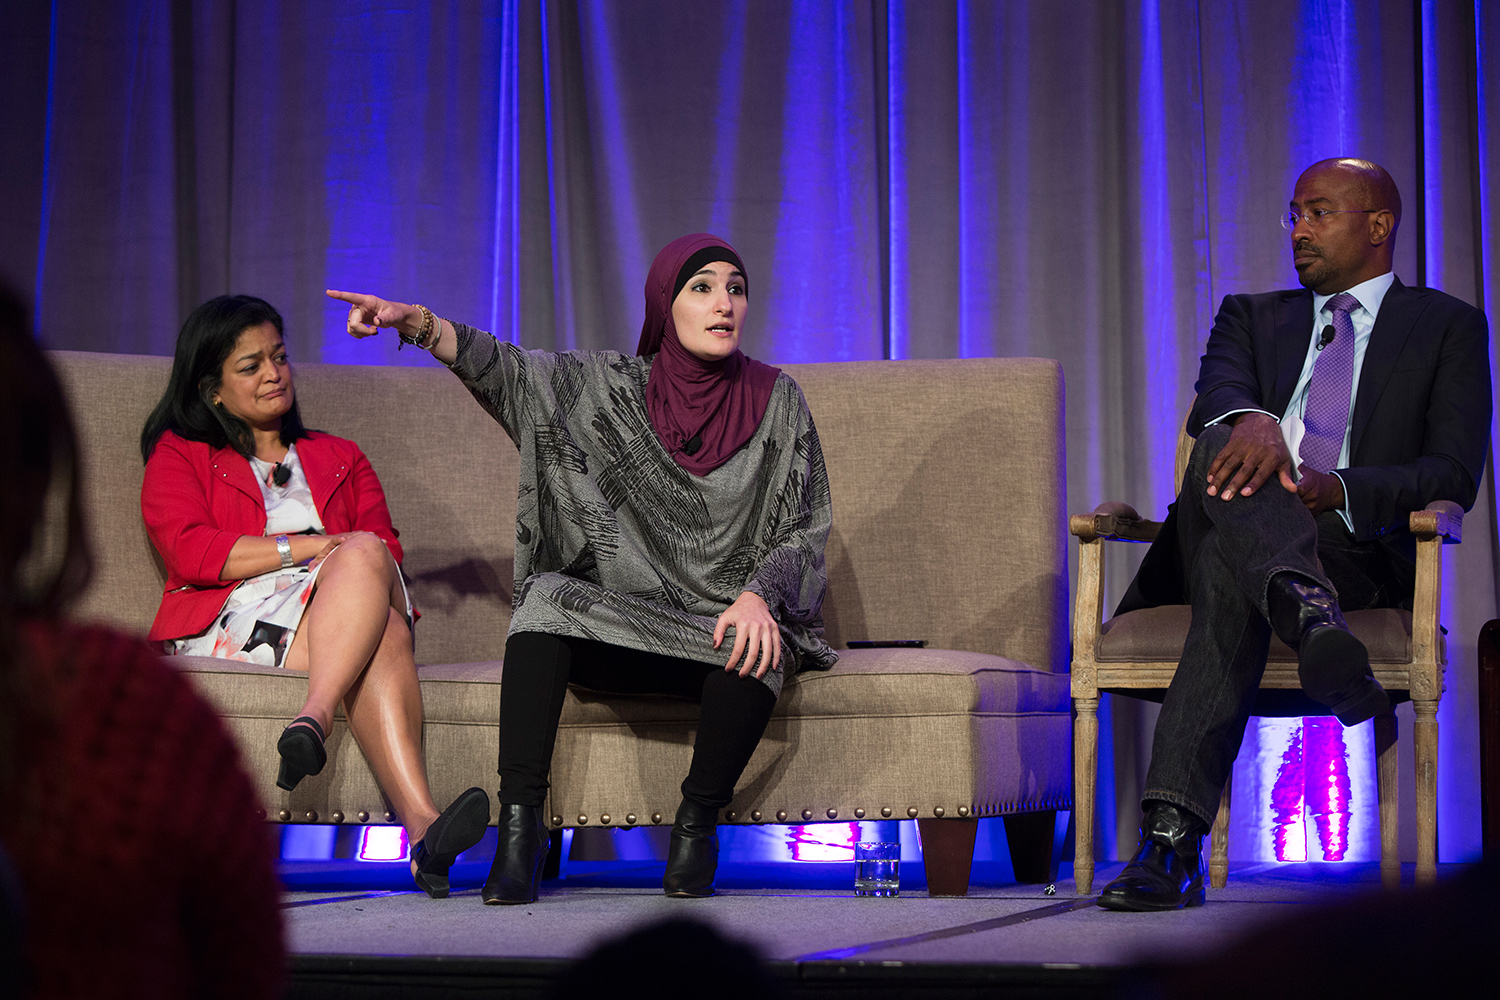  Linda Sarsour ( Arab American Association of New York ) speaks at plenary session "Where Do We Go From Here?" during Facing Race 2016 (at the far left of the image is Pramila Jayapal, state senator and  US Representative-elect , D-WA; on the right s